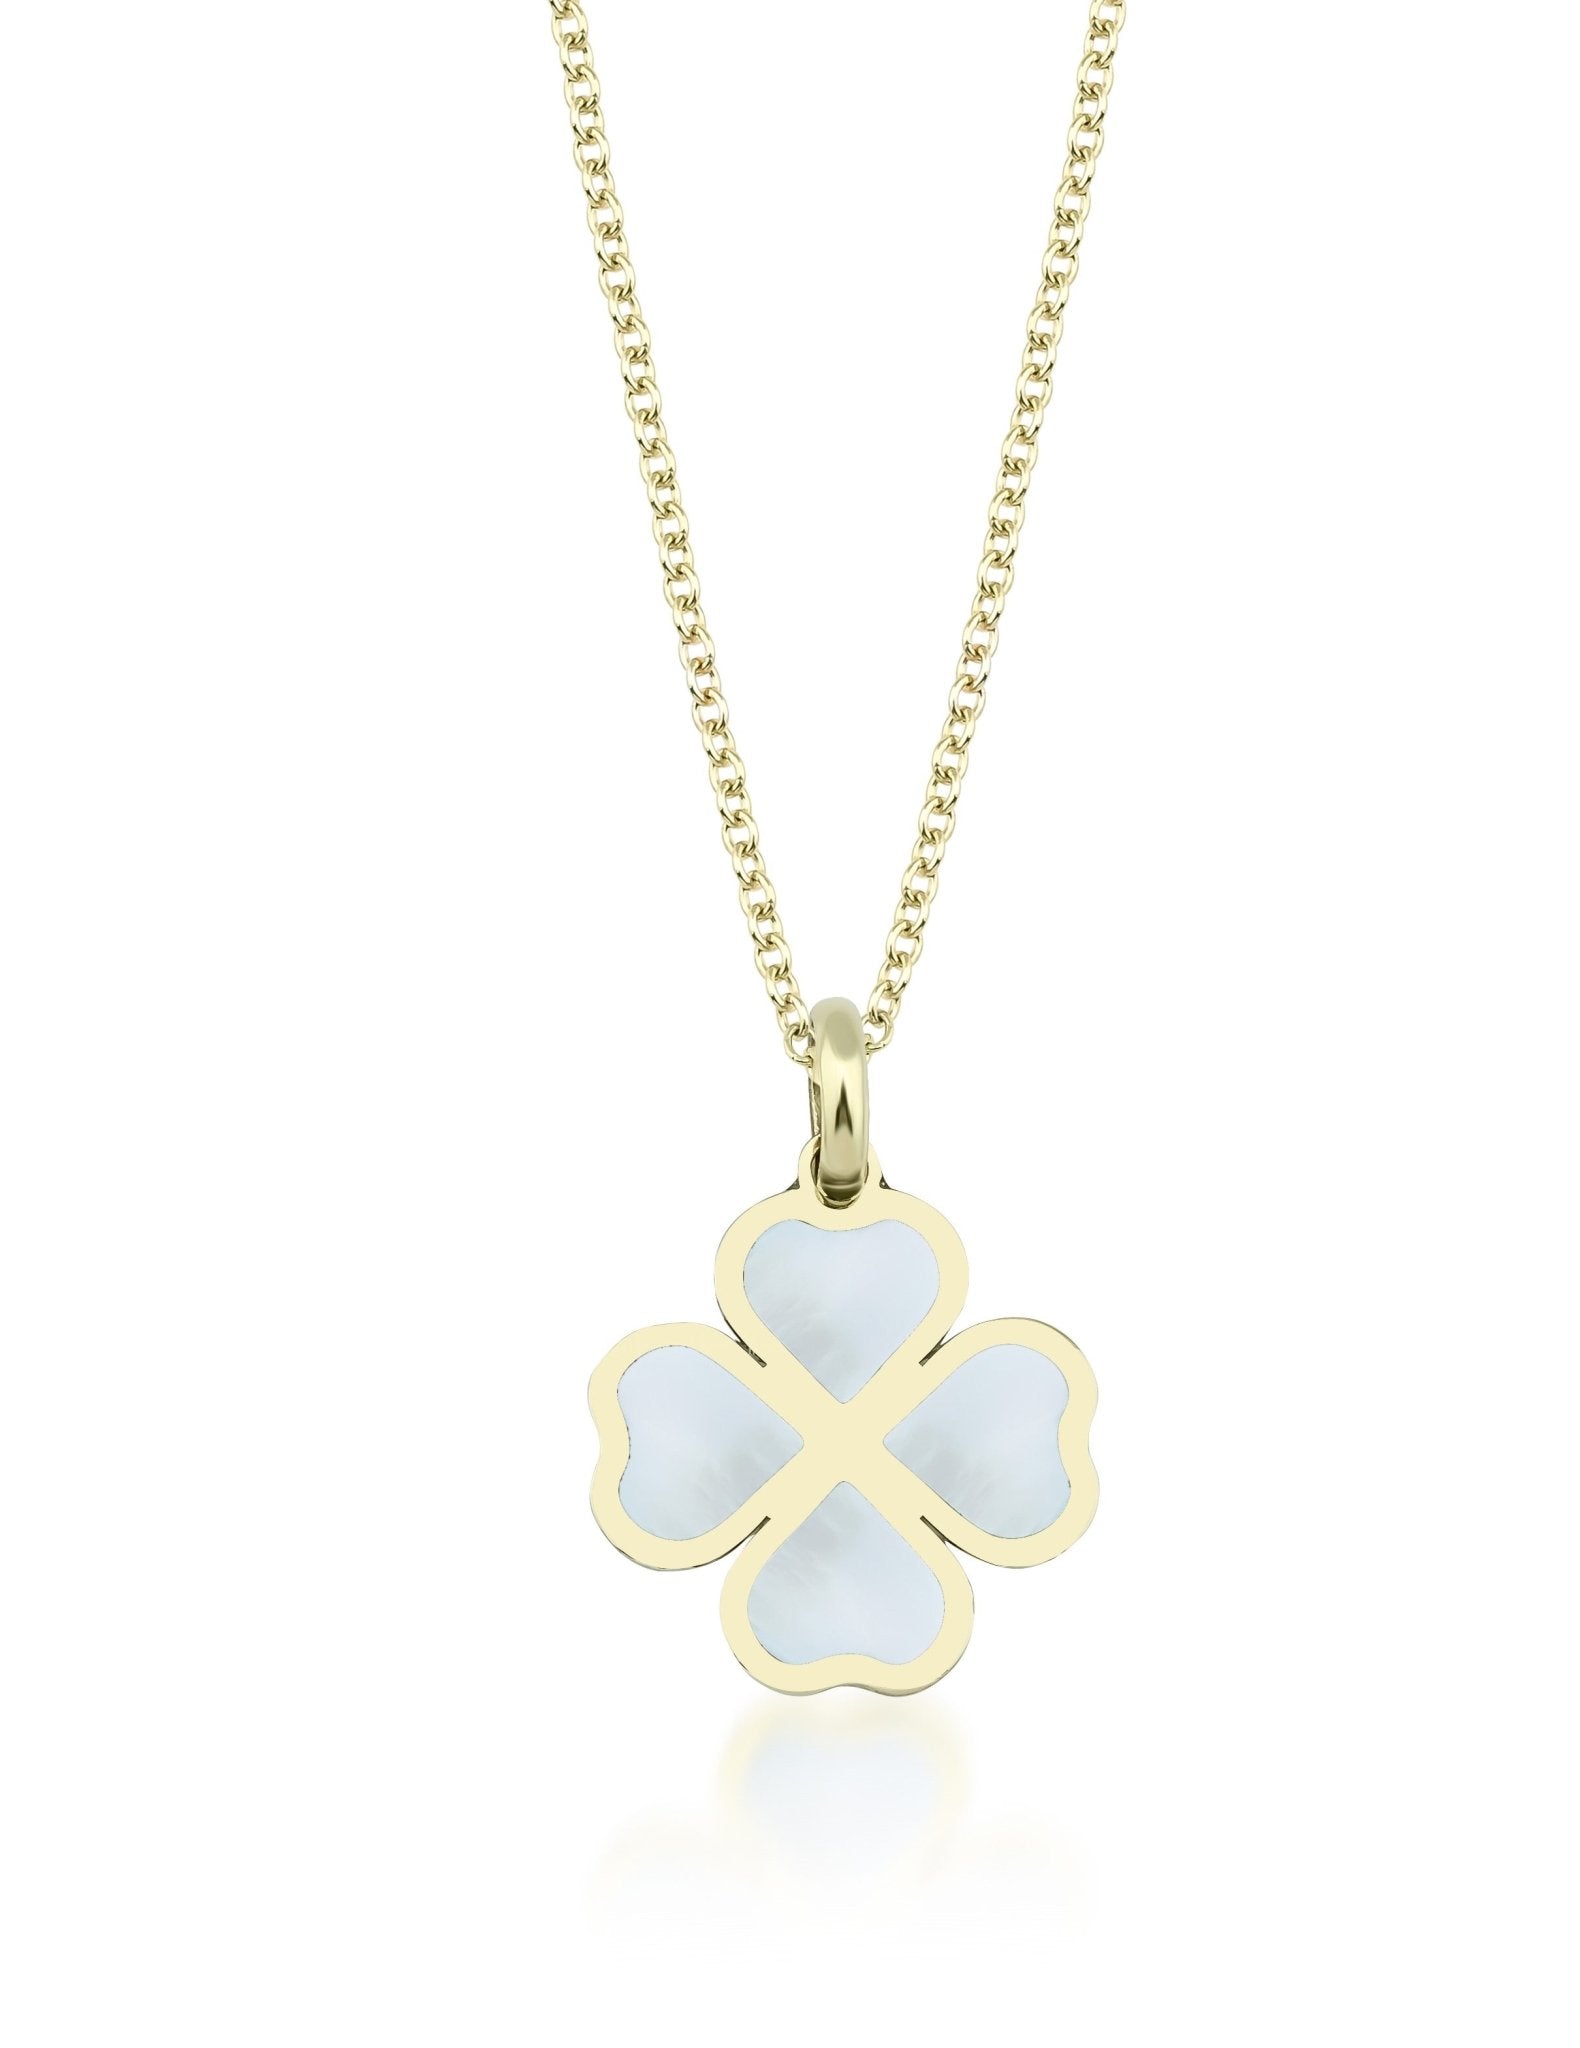 14K Solid Yellow Gold Pink Four Leaf Clover Station Necklace